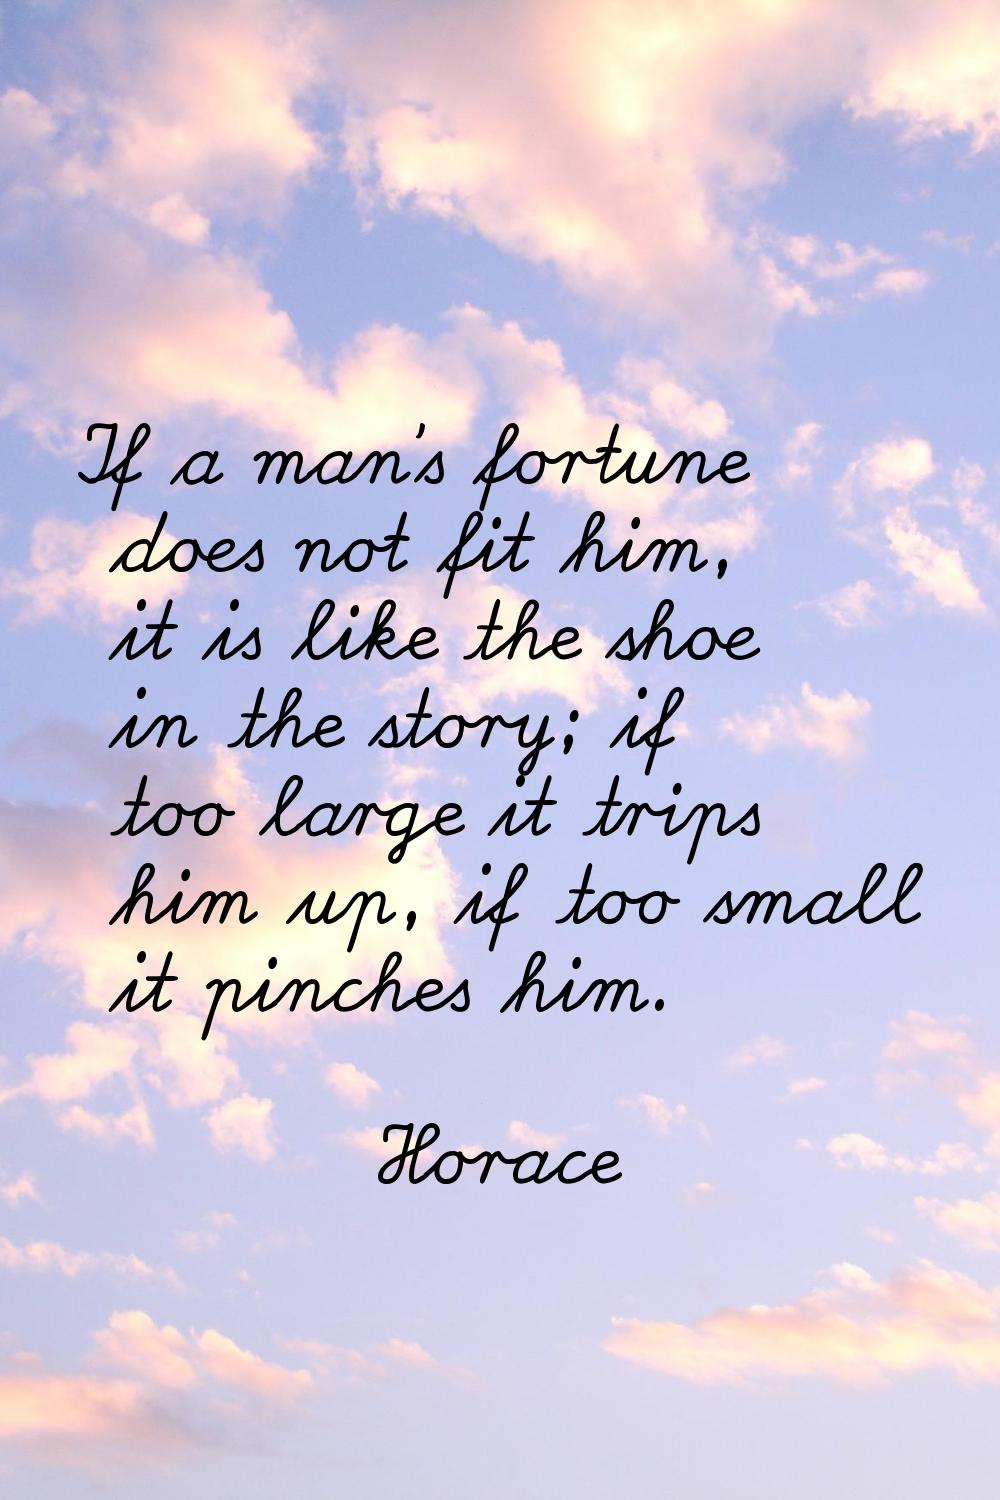 If a man's fortune does not fit him, it is like the shoe in the story; if too large it trips him up